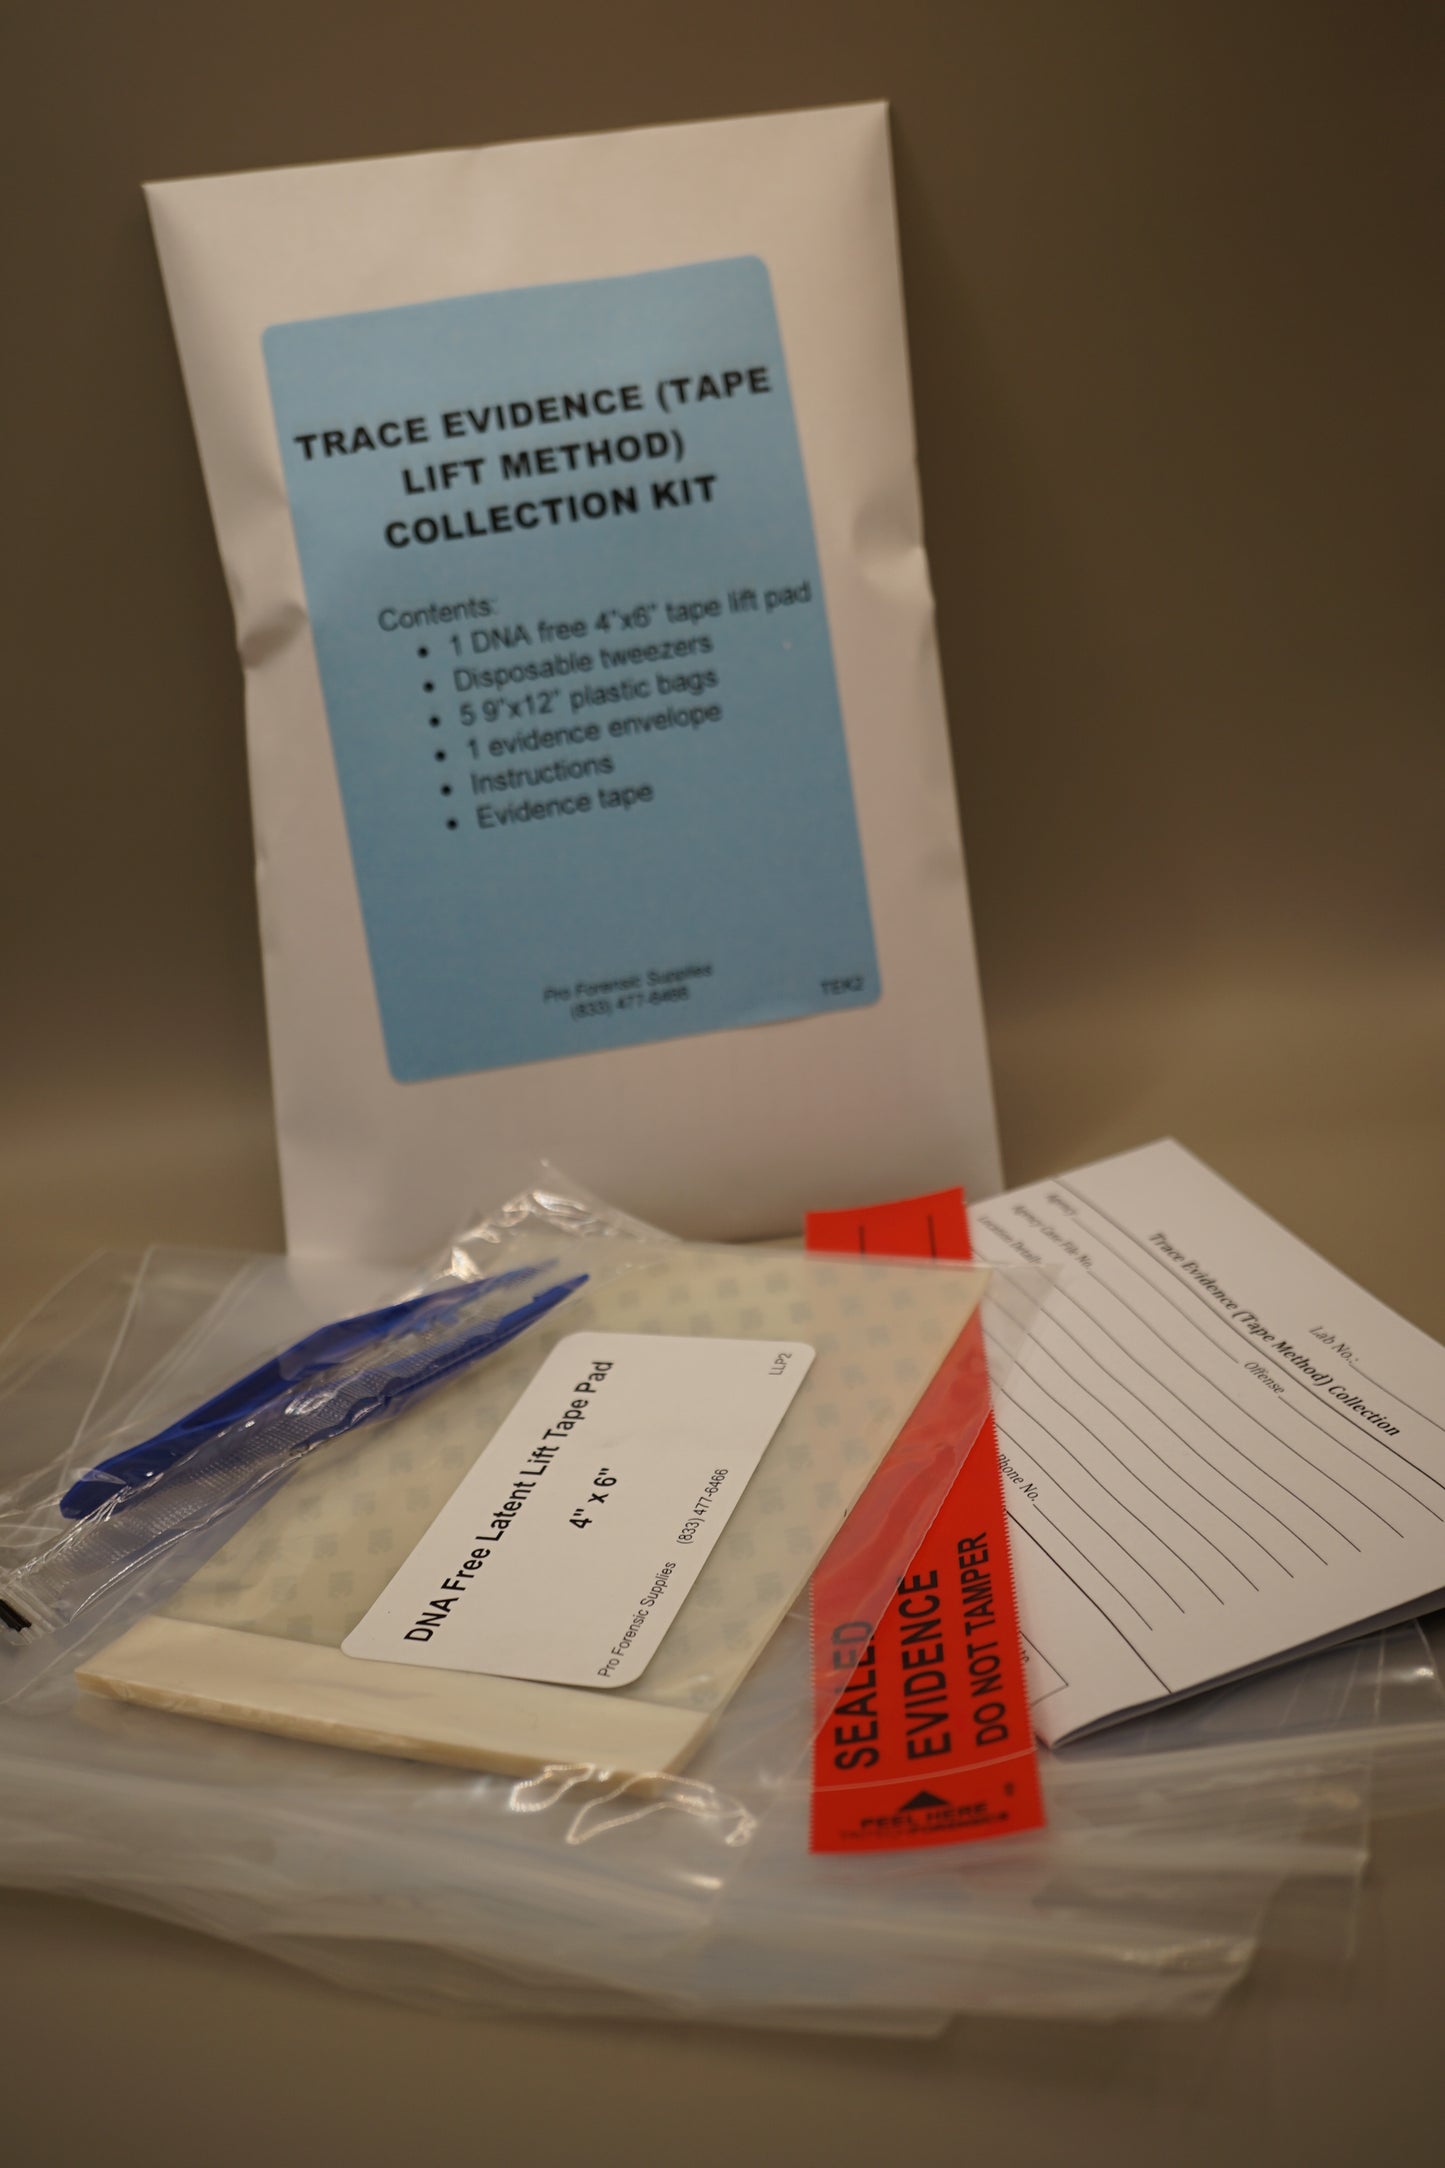 Trace Evidence (Tape Lift Method) Collection Kit